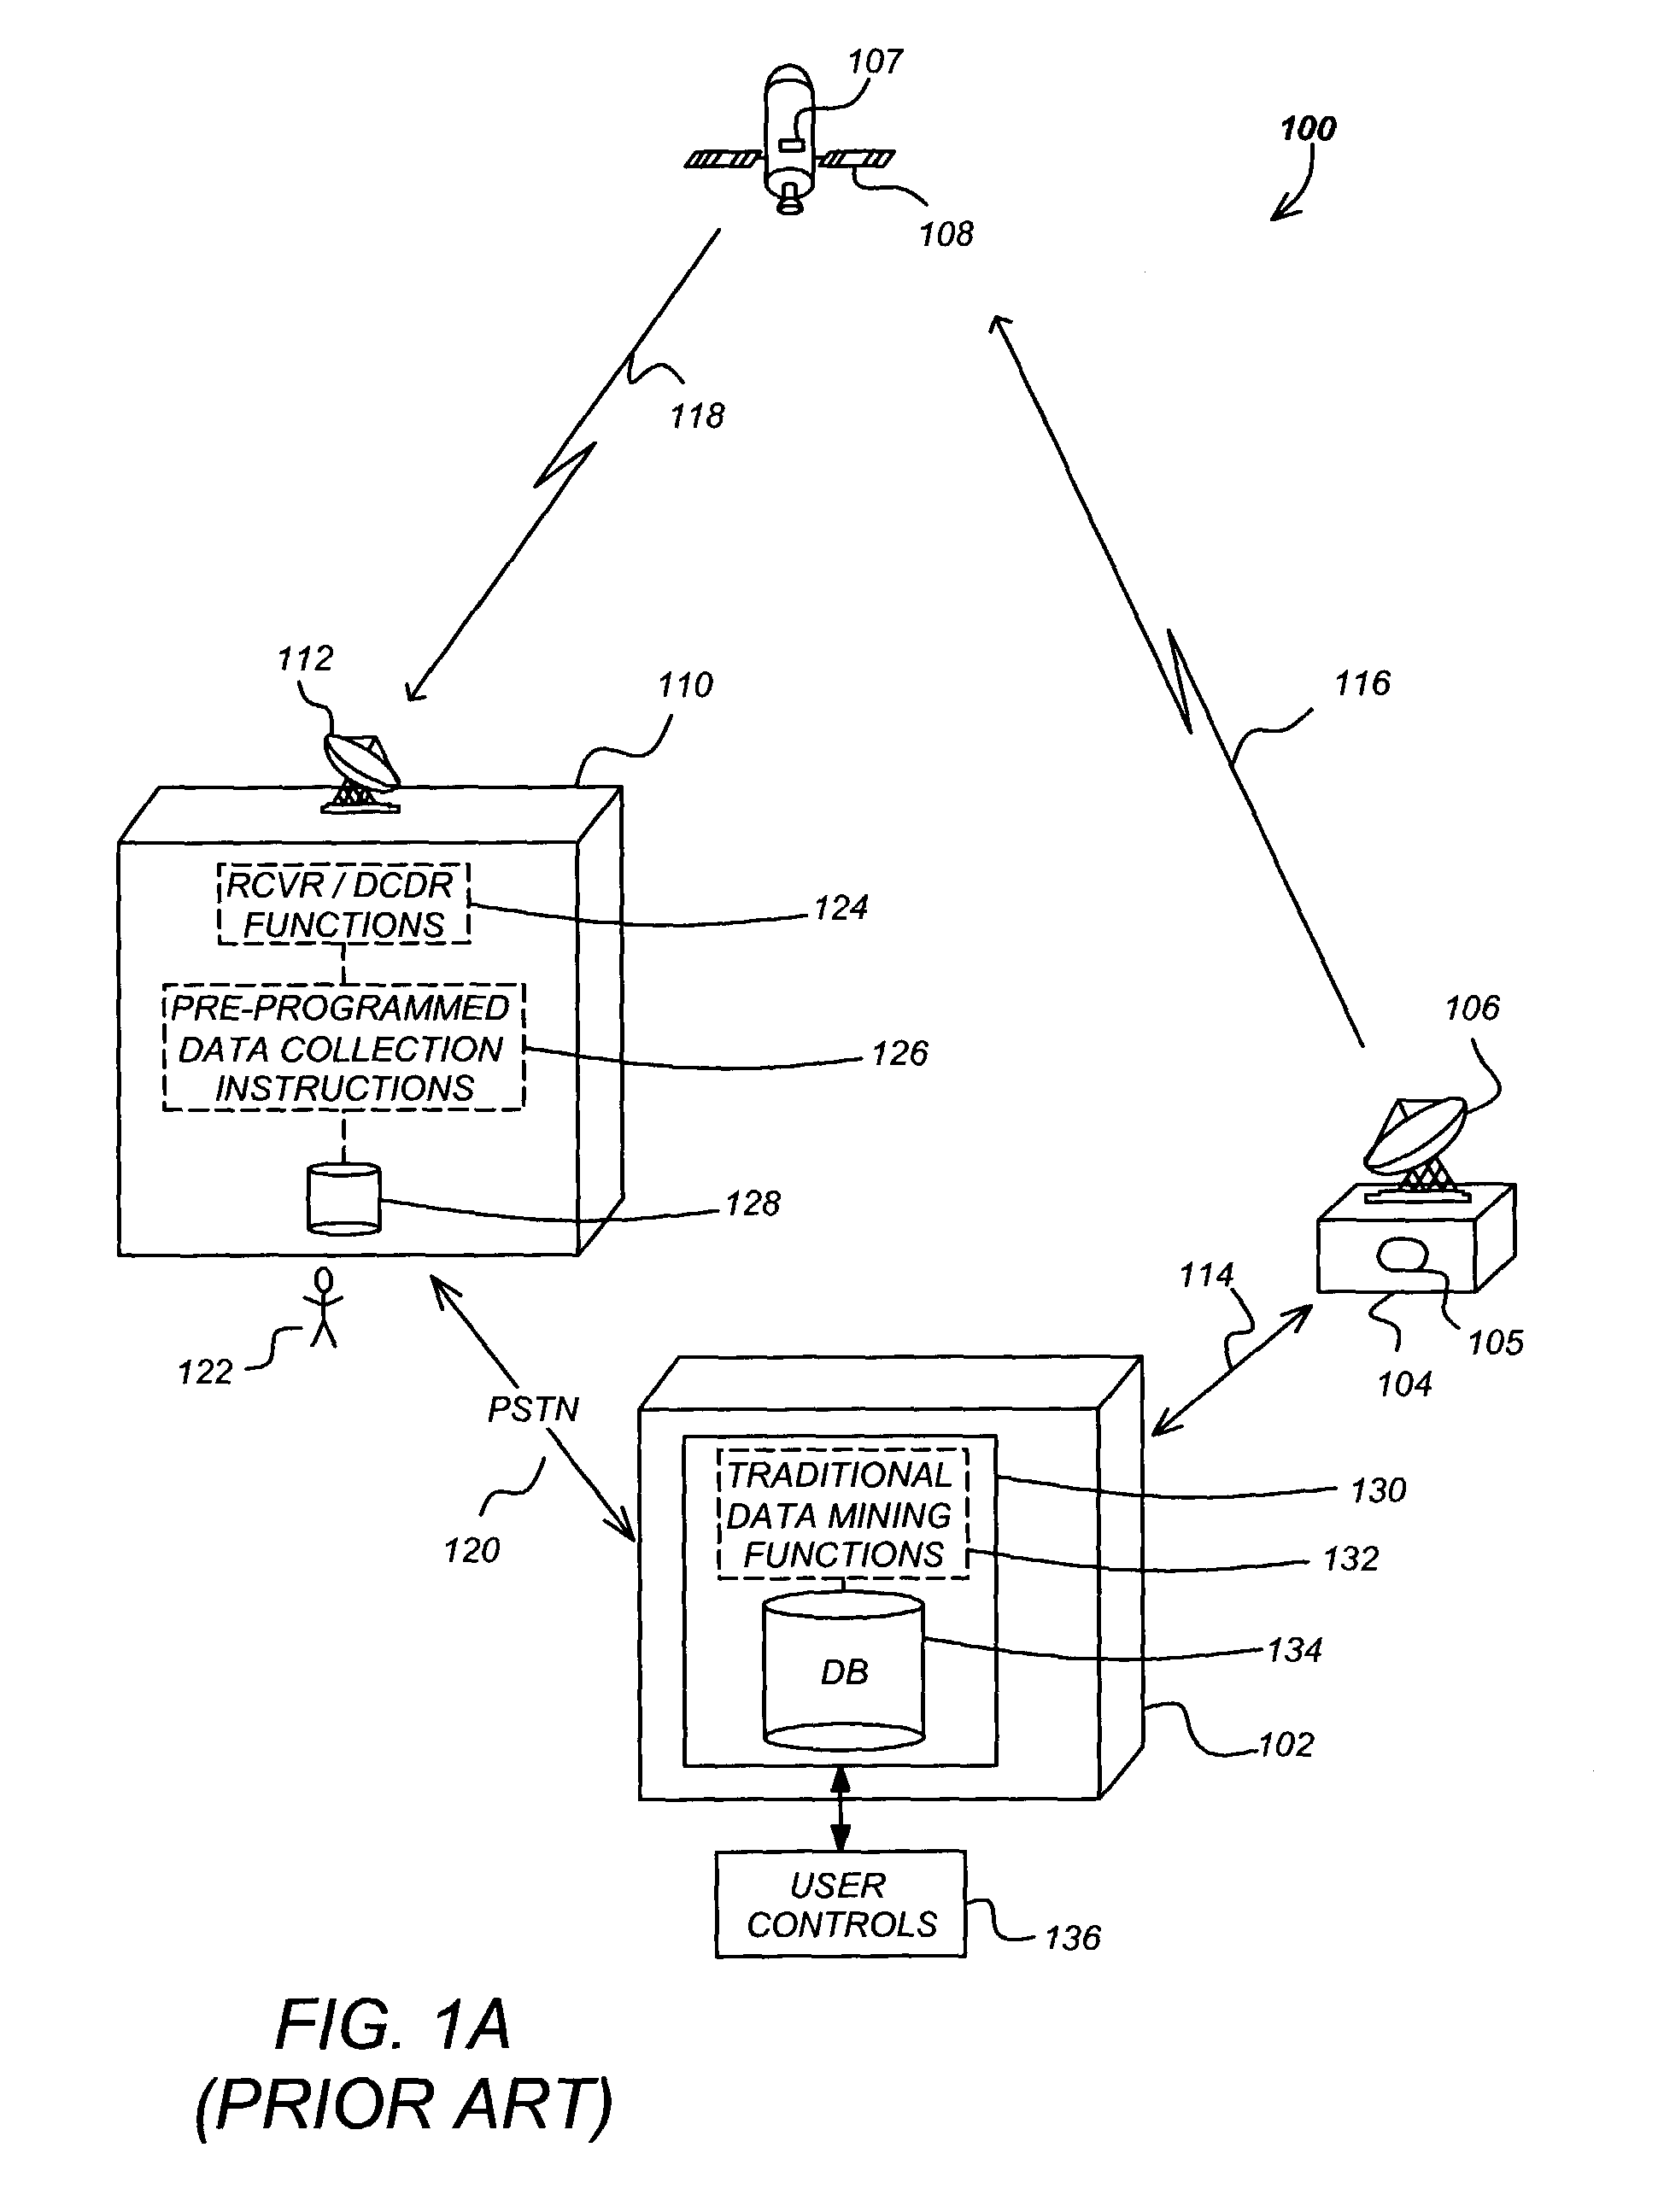 Distributed storage and processing of viewing usage data